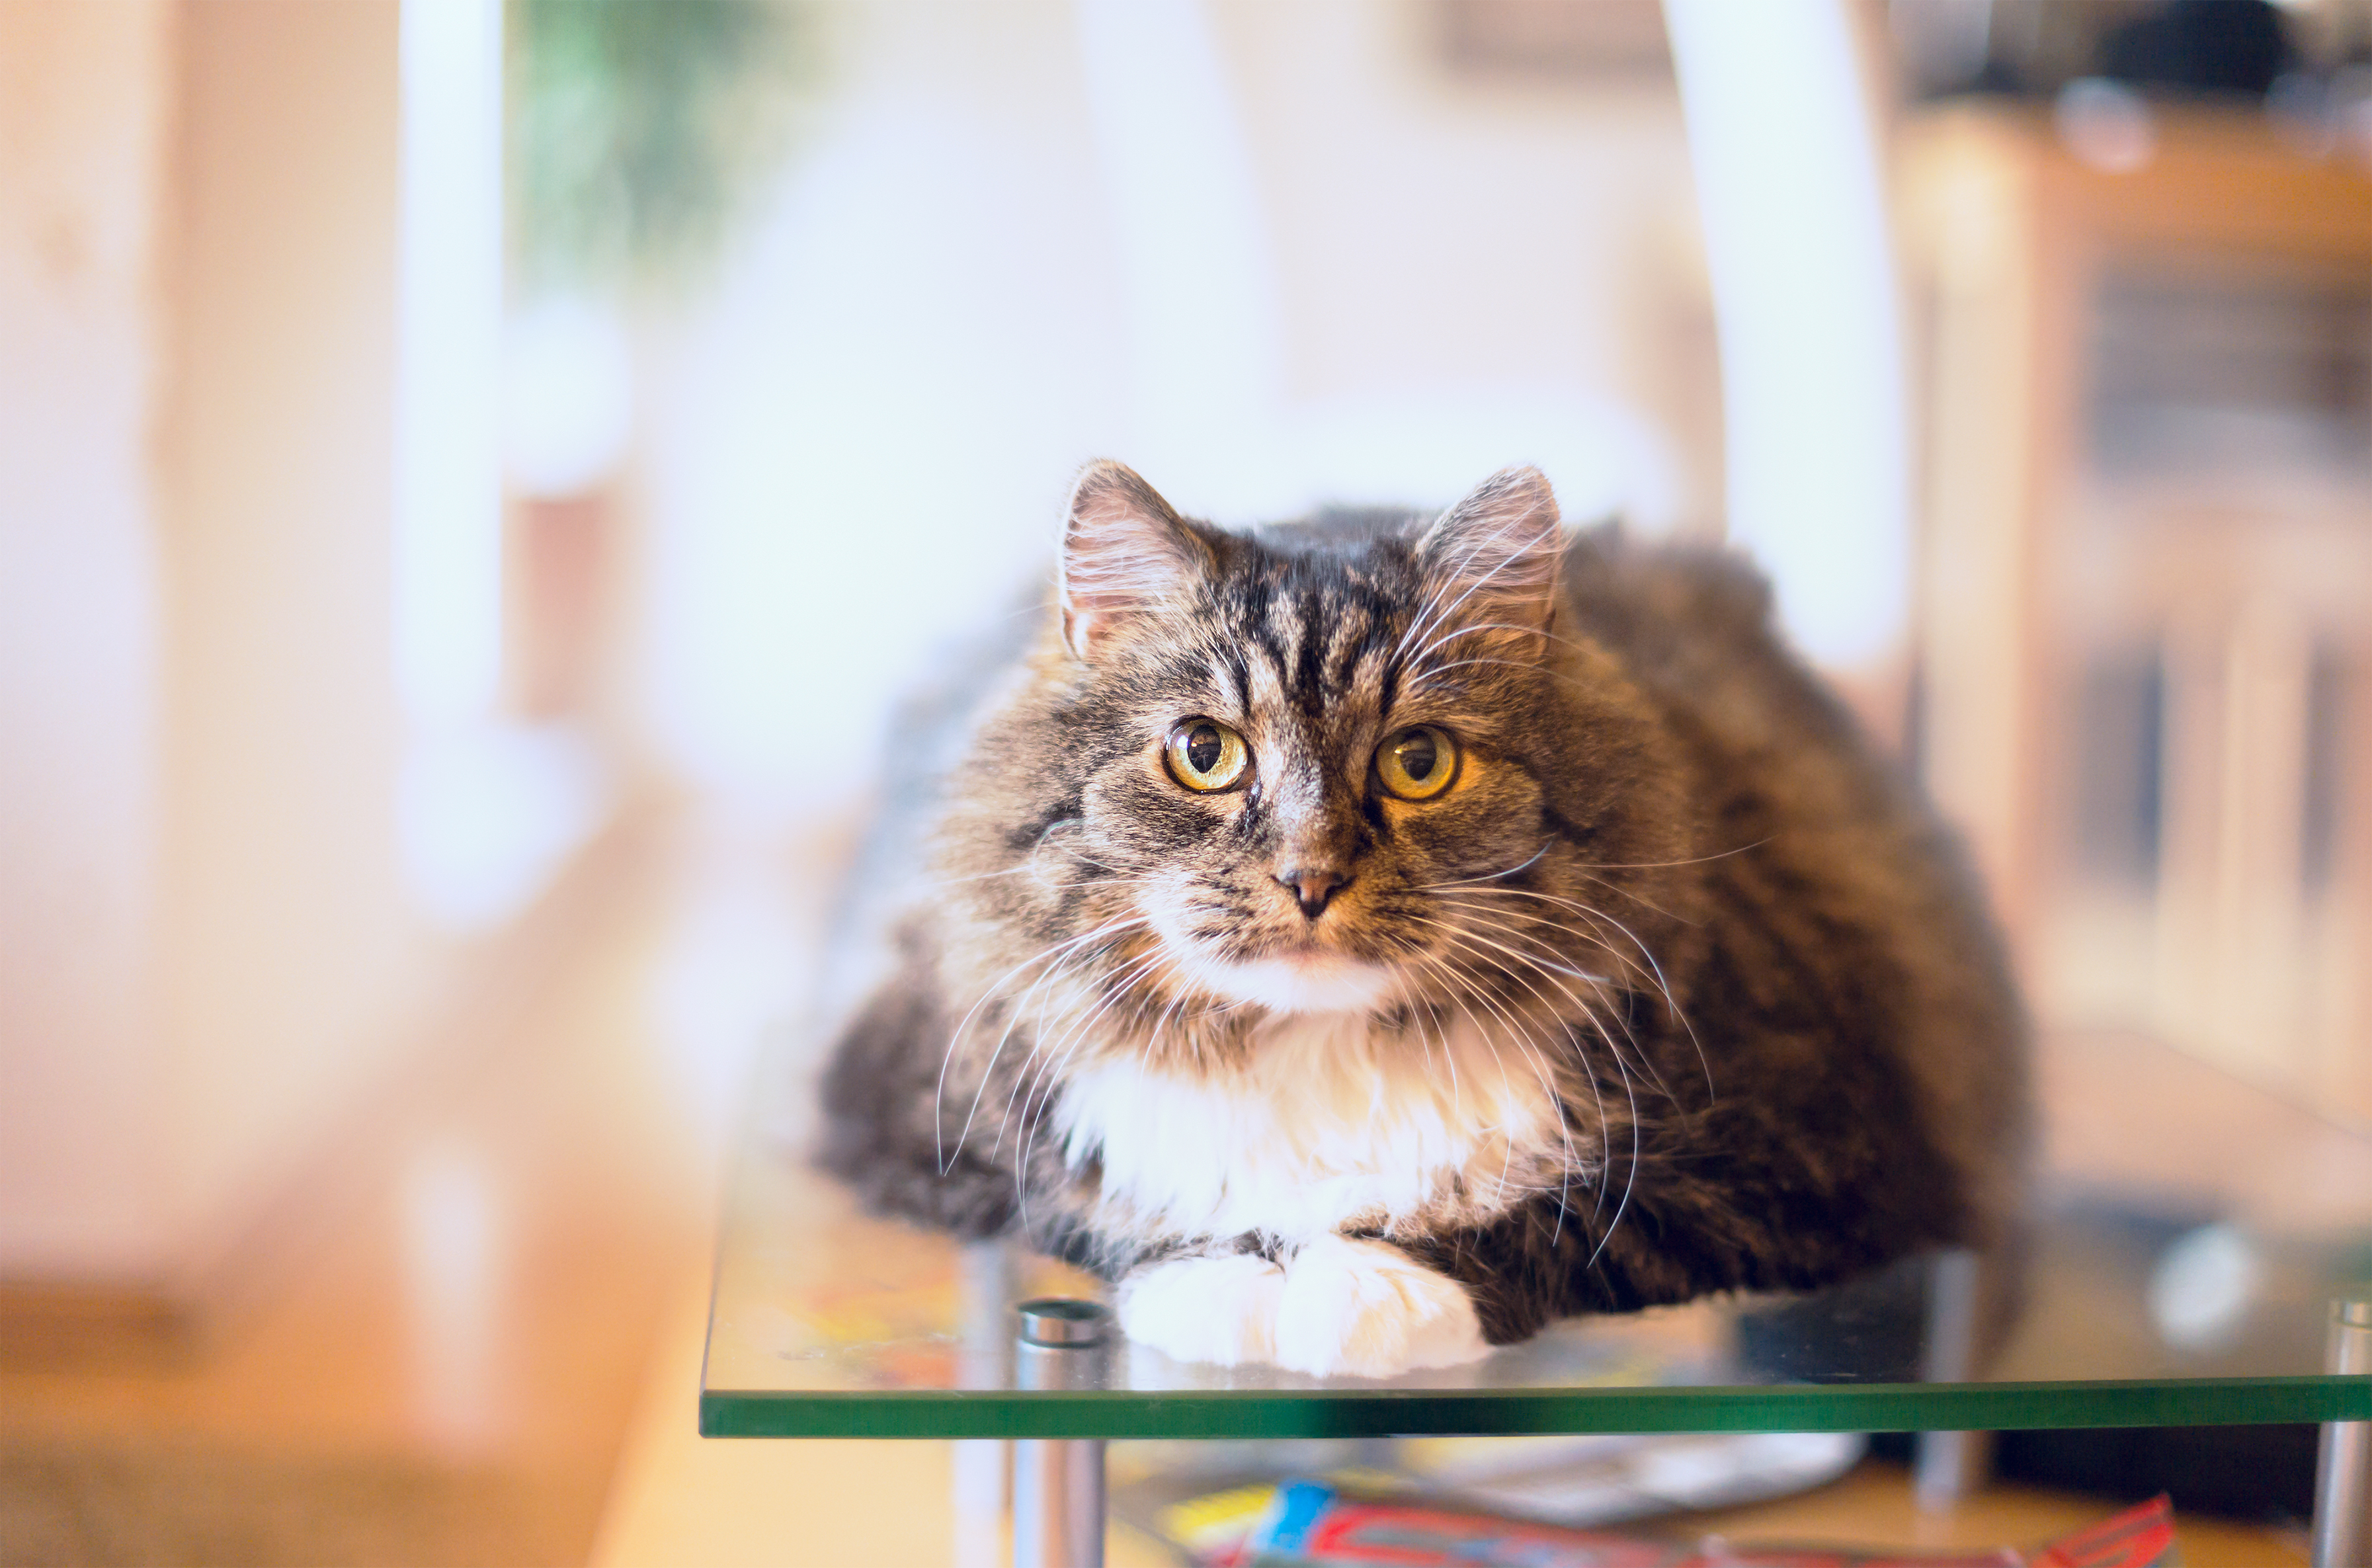 Cat sitting on glass table.